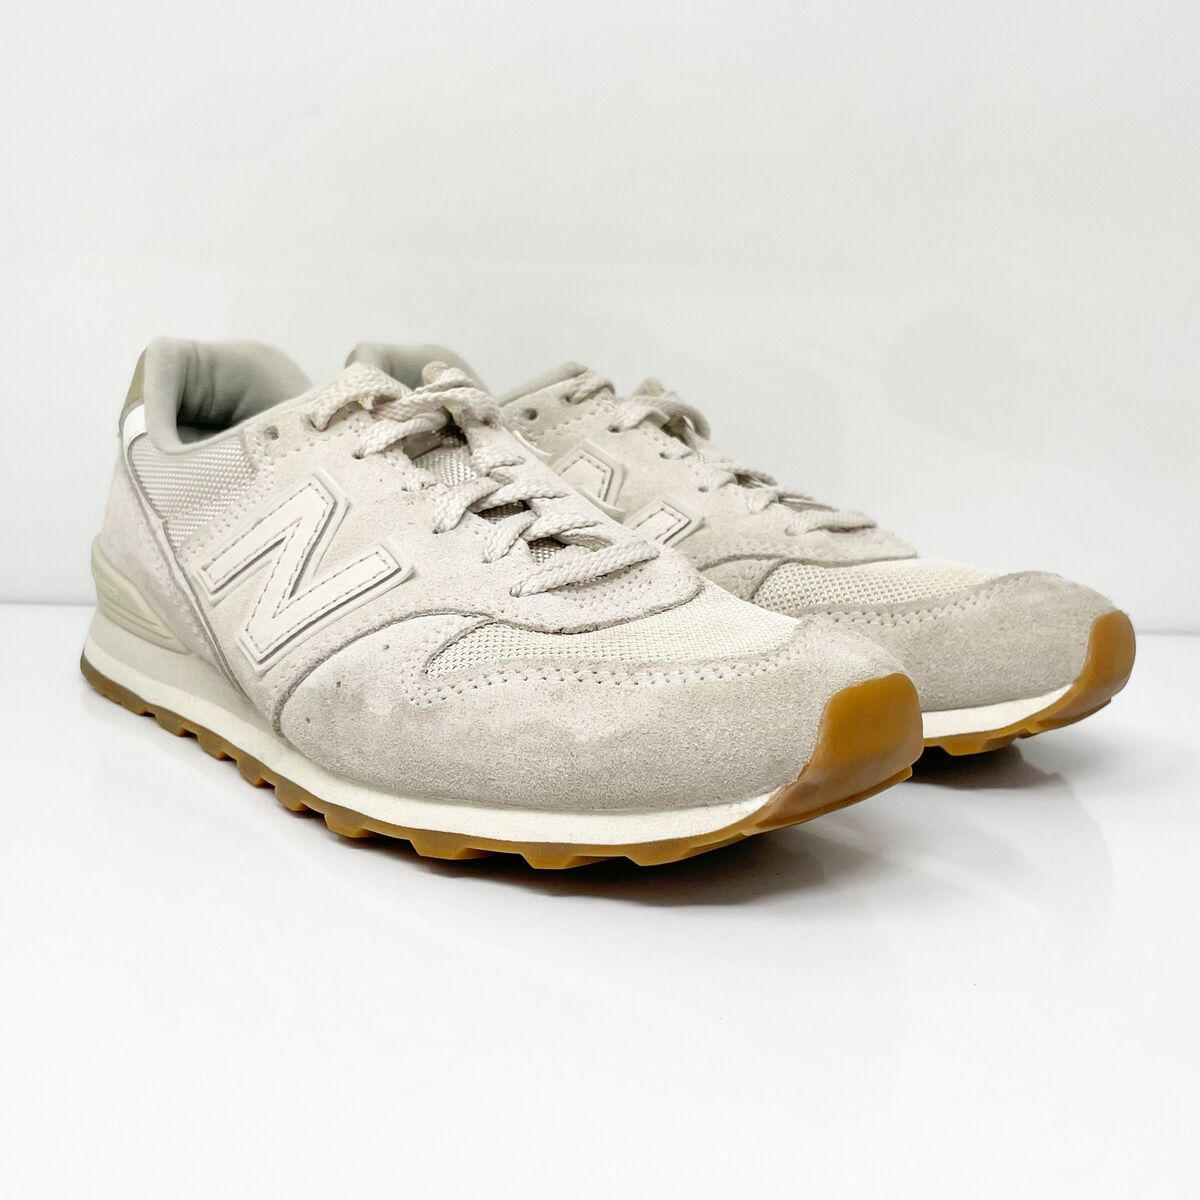 New Balance Womens 996 WL996NC Beige Casual Shoes Sneakers Size 